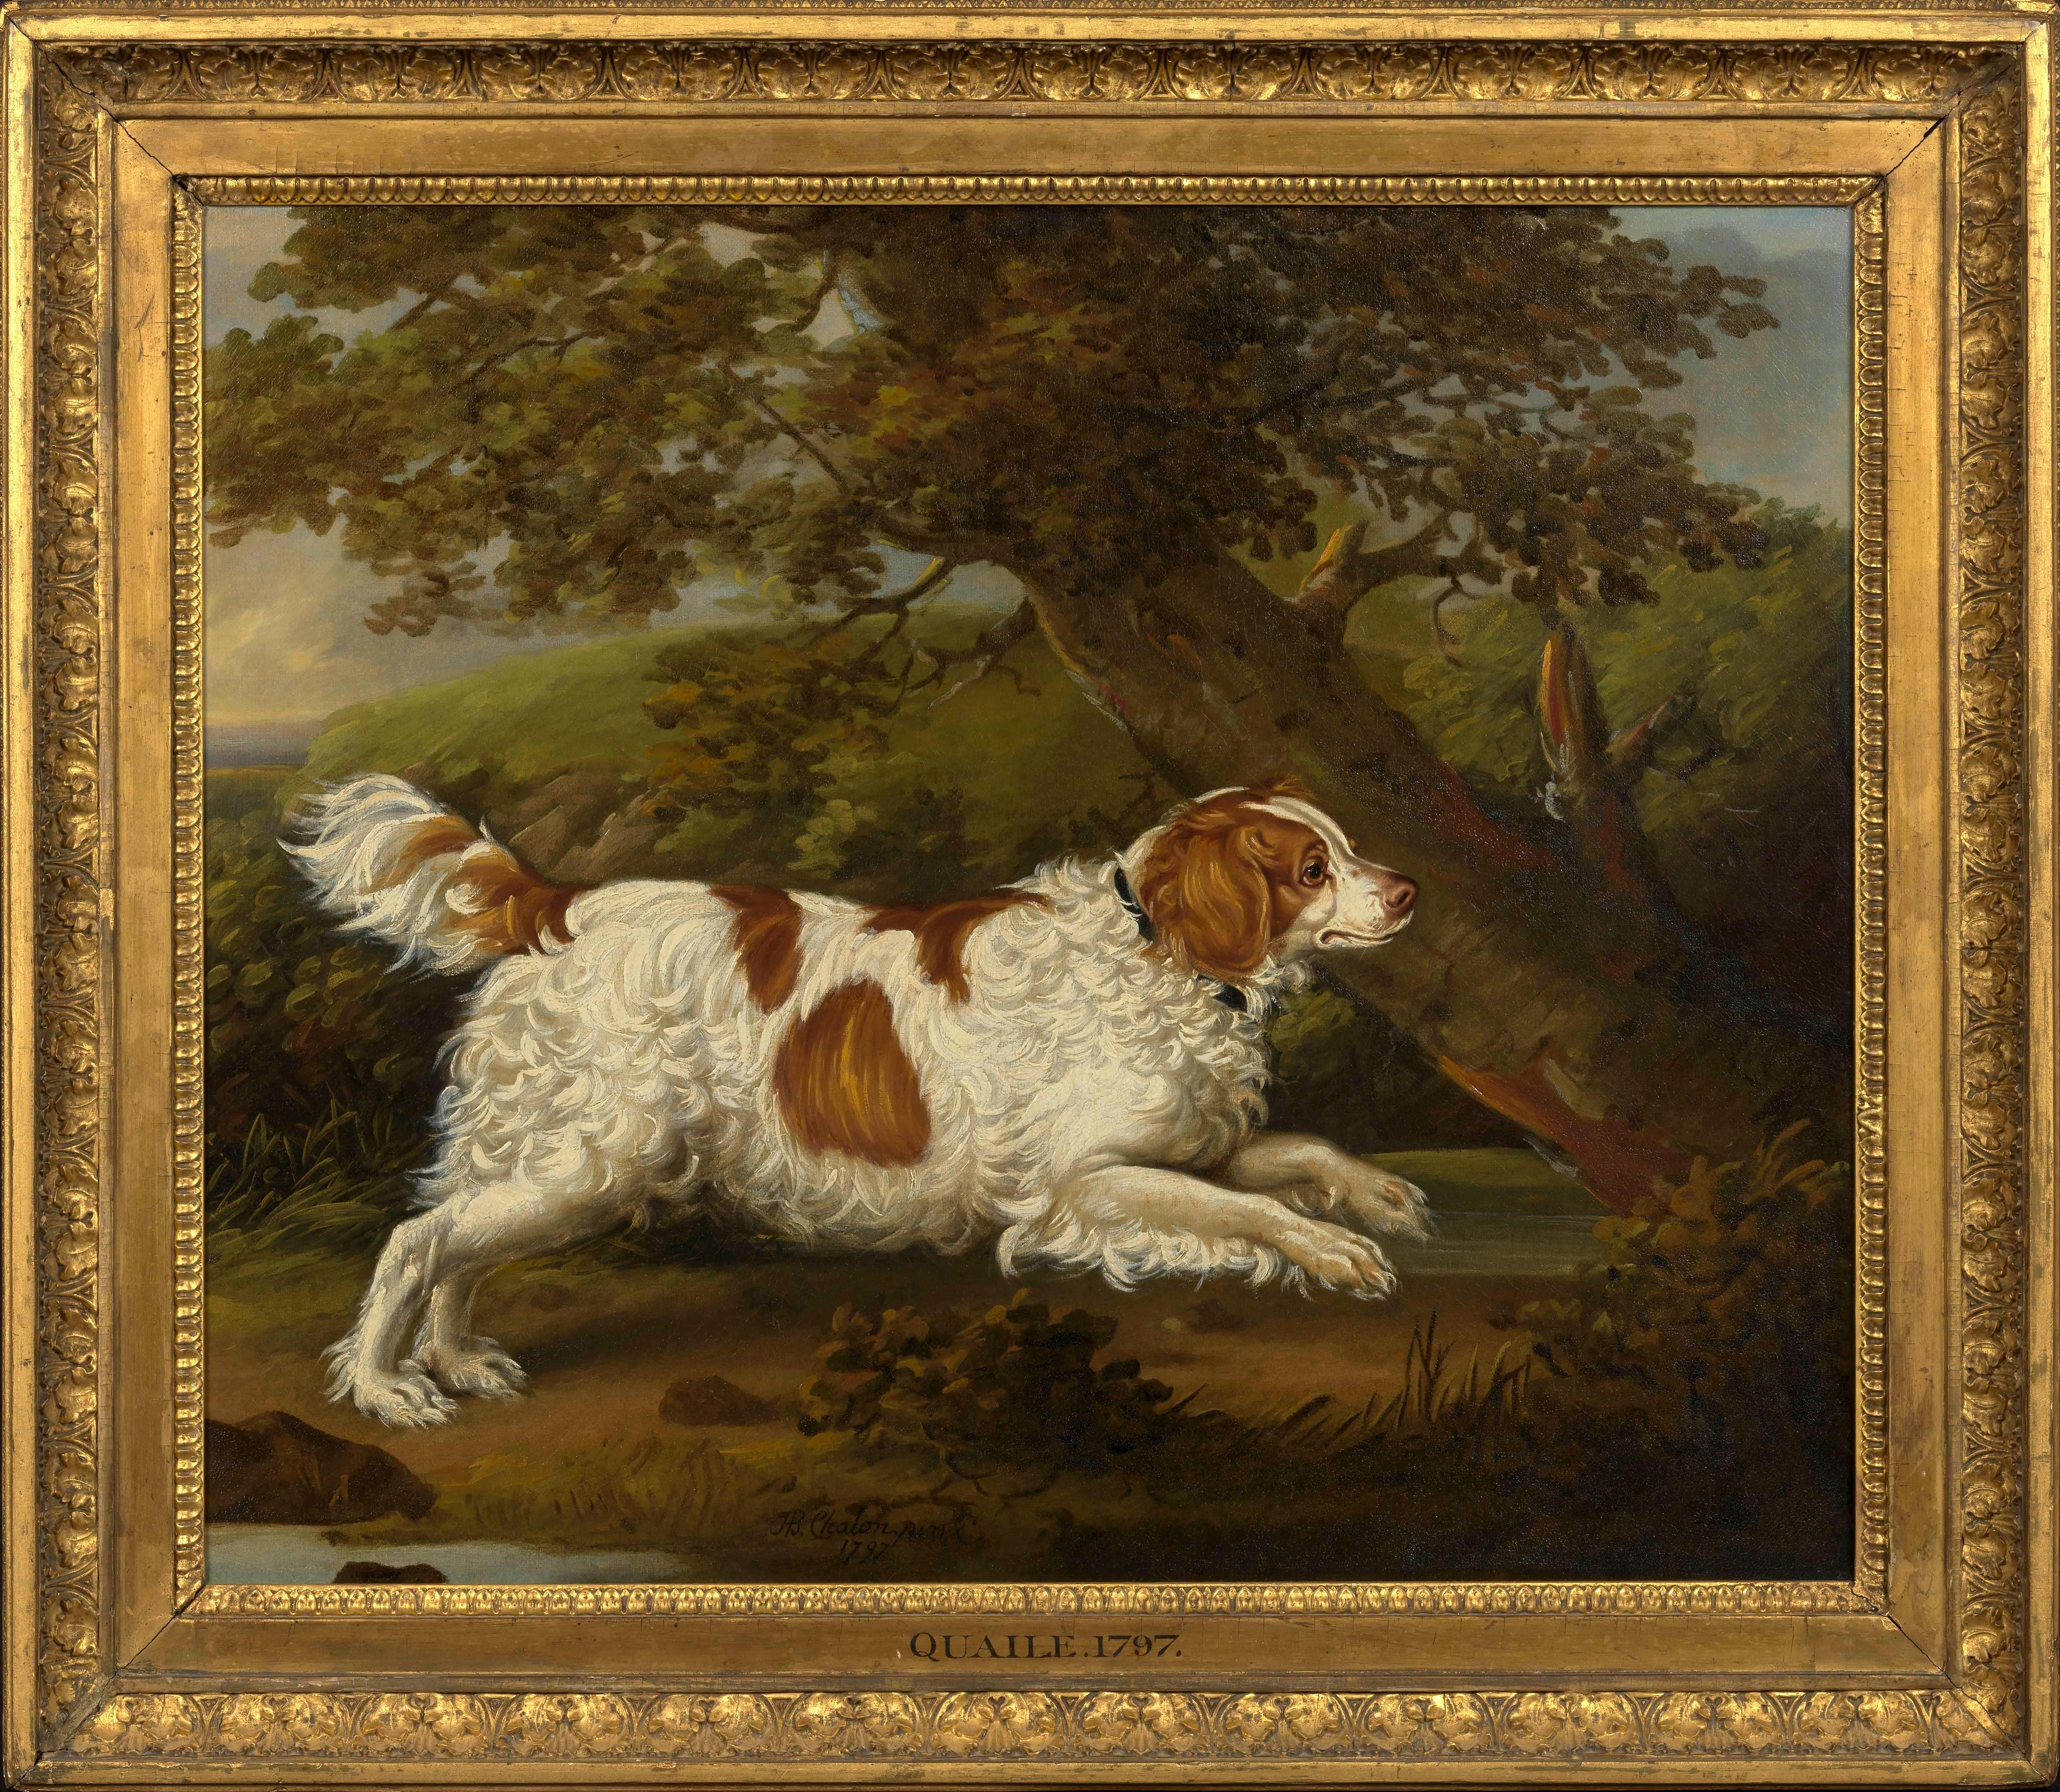 Henry Bernard Chalon Animal Painting - "Quaile", an English spaniel in a wooded landscape